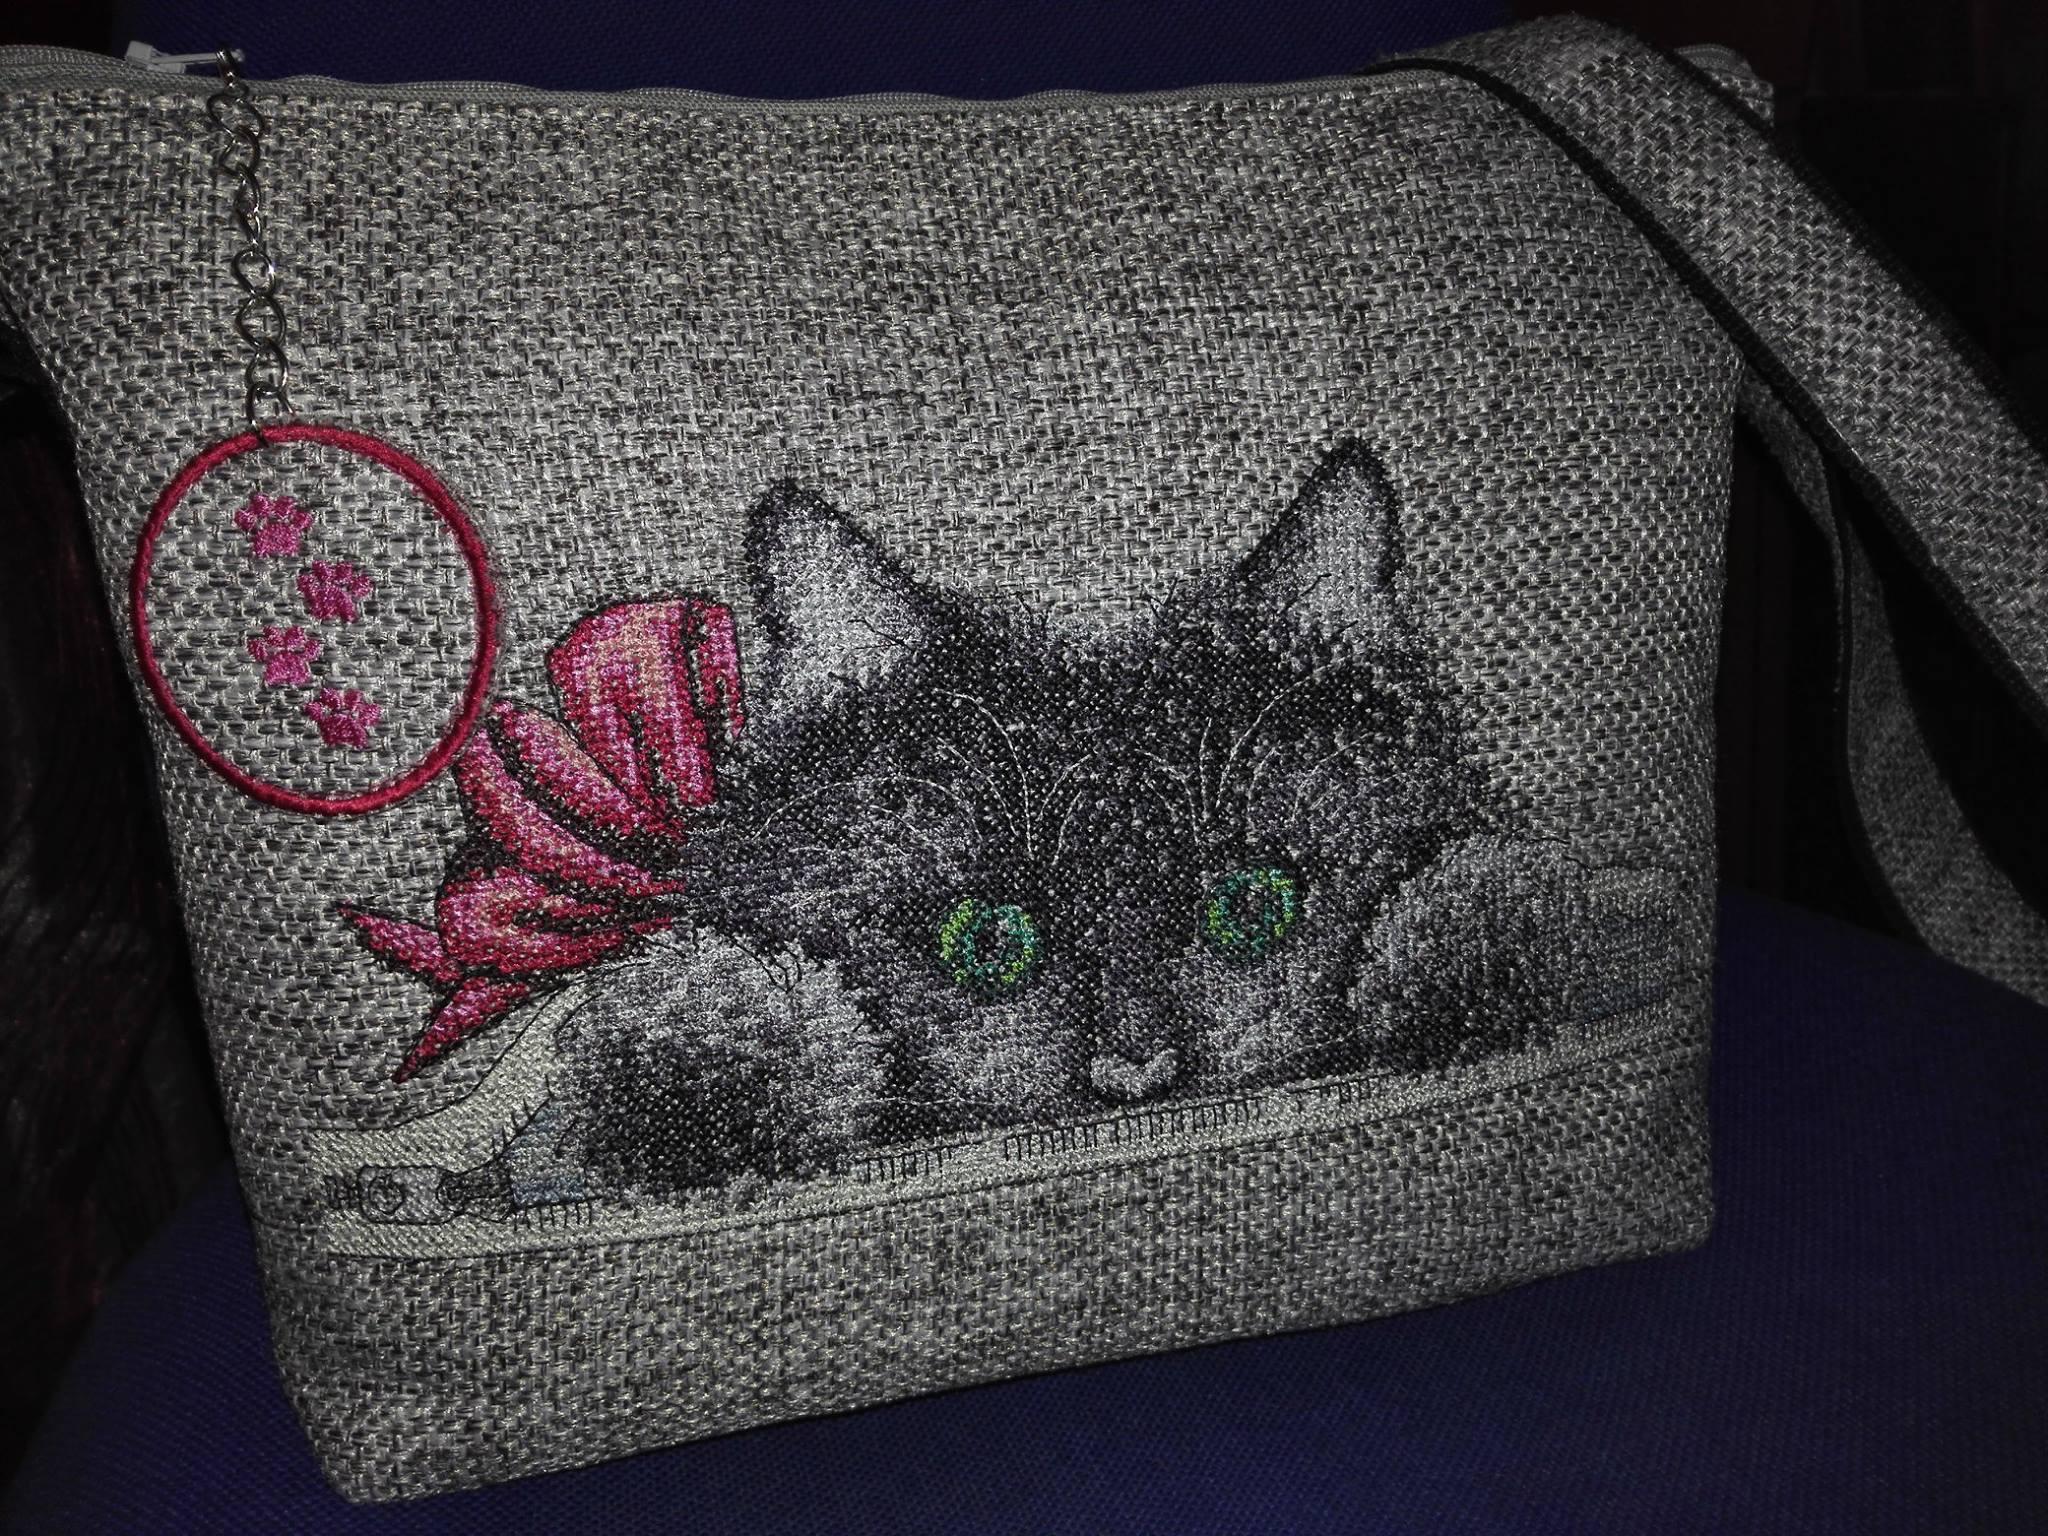 Bag with cat cross stitch free embroidery design